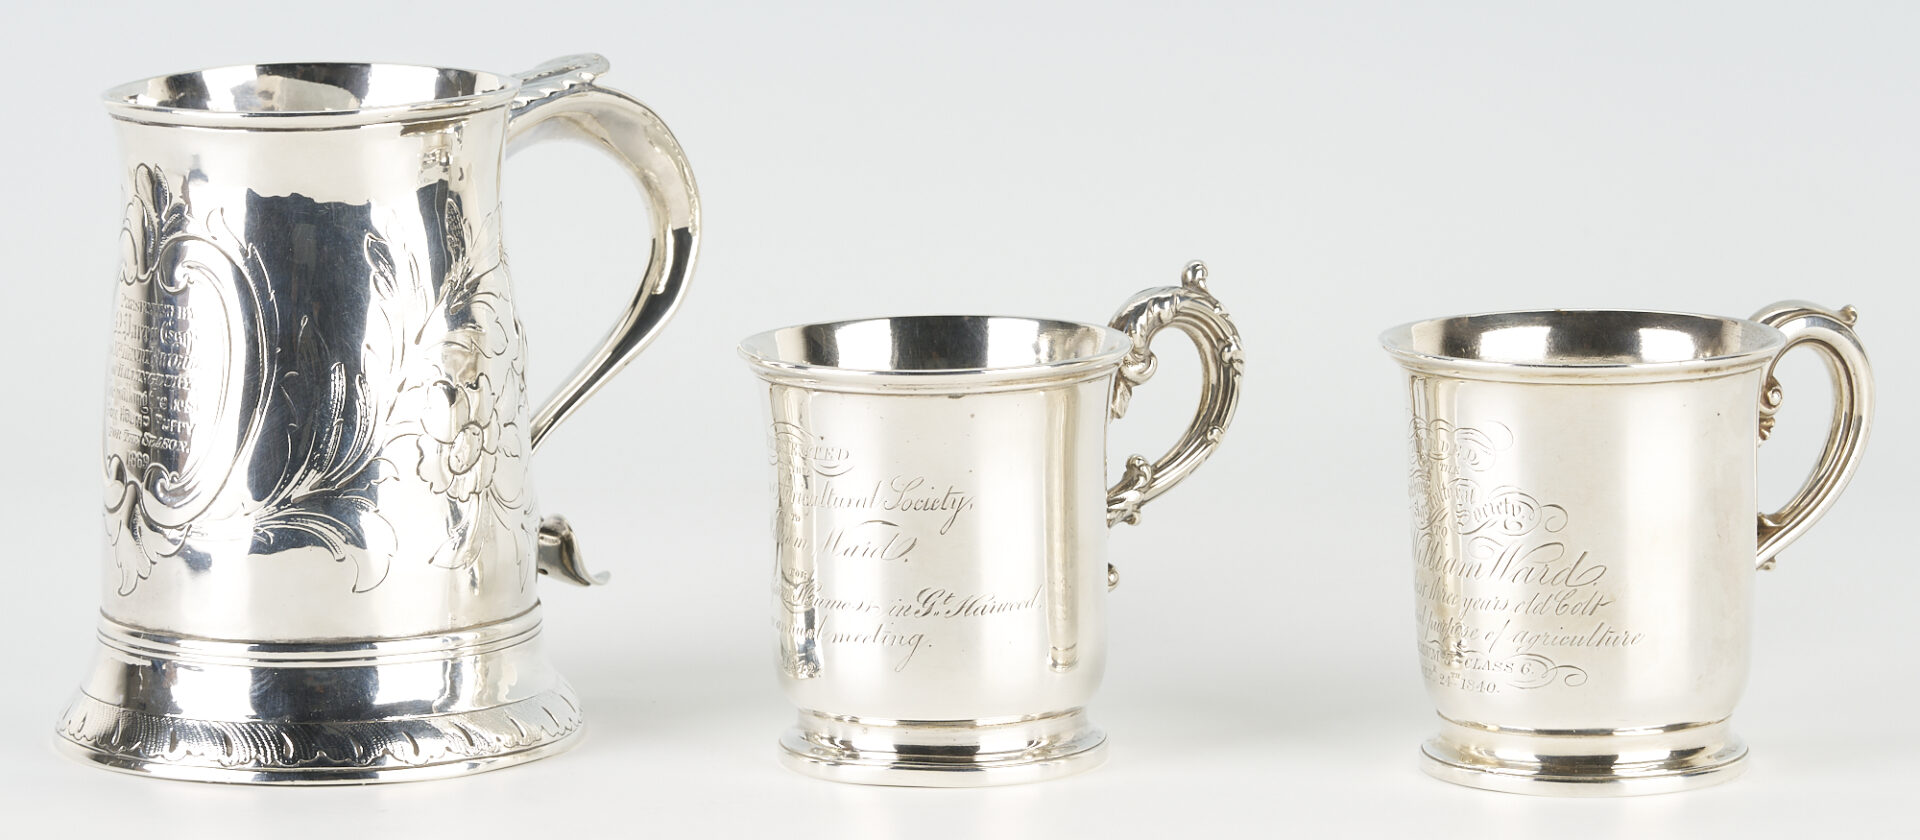 Lot 43: 3 Silver Cups including "Best Fox Hound Puppy" Trophy Cup